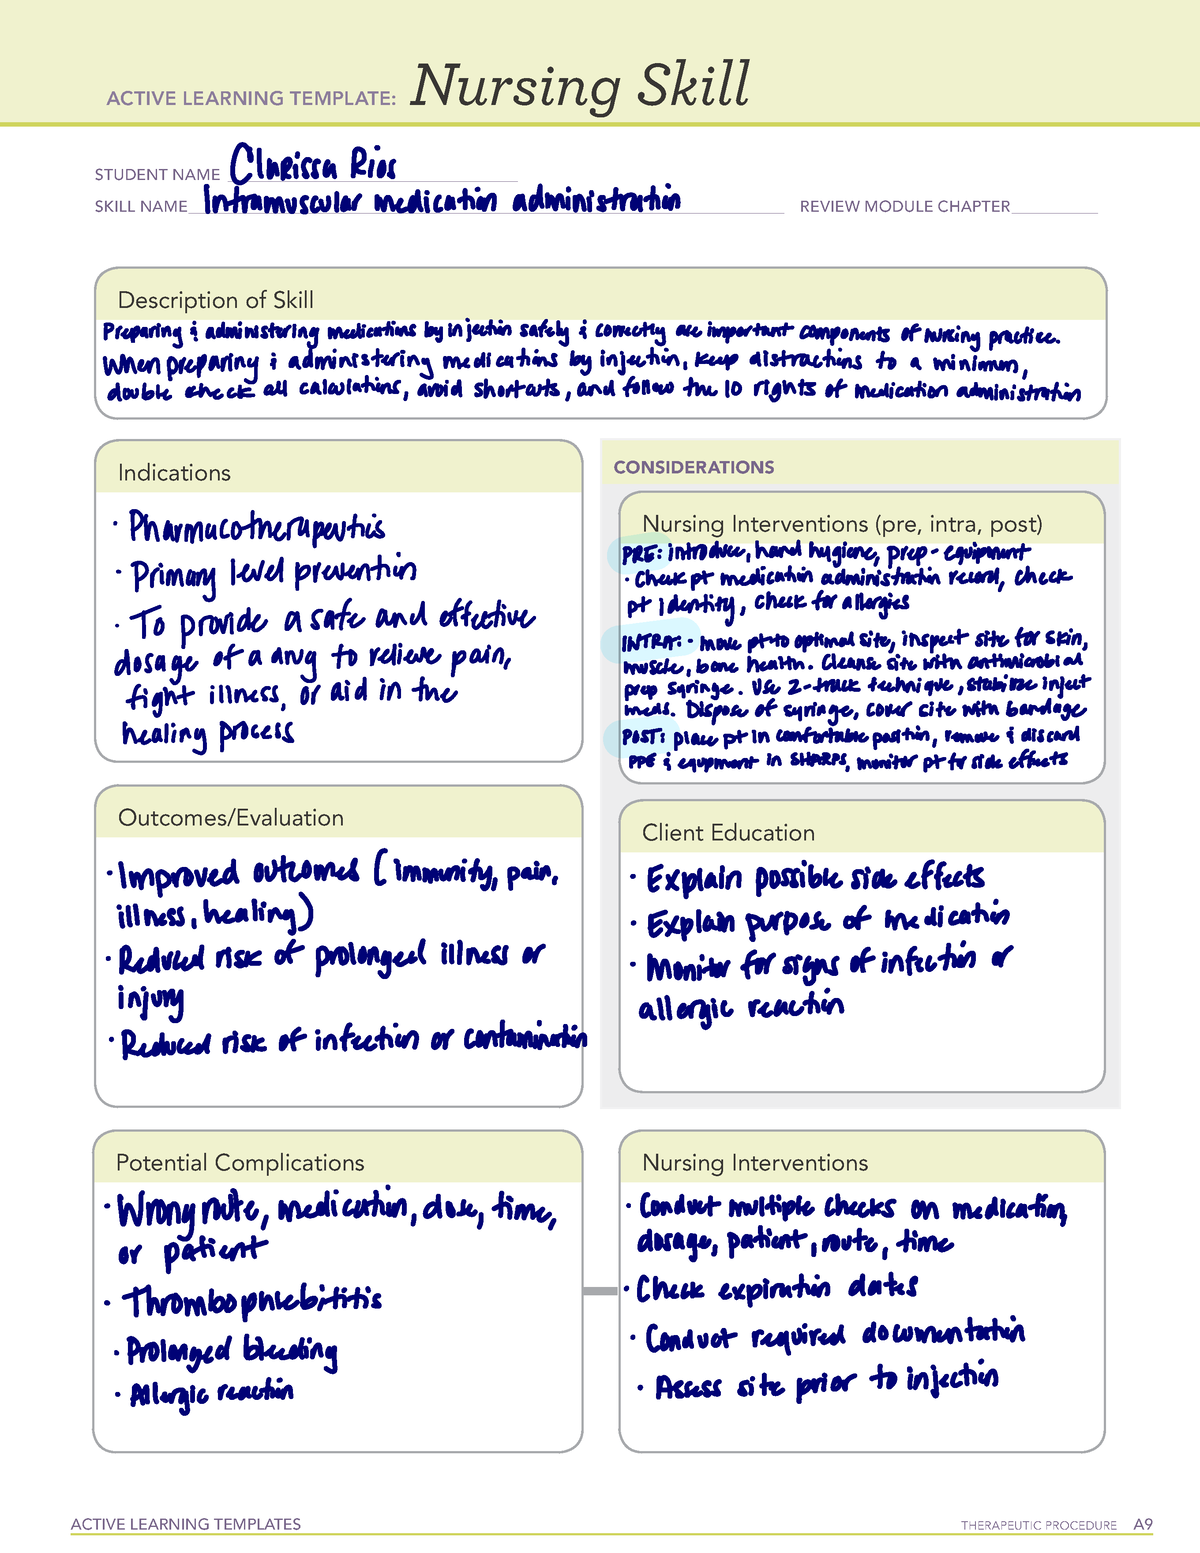 nursing-skill-im-administration-active-learning-templates-therapeutic